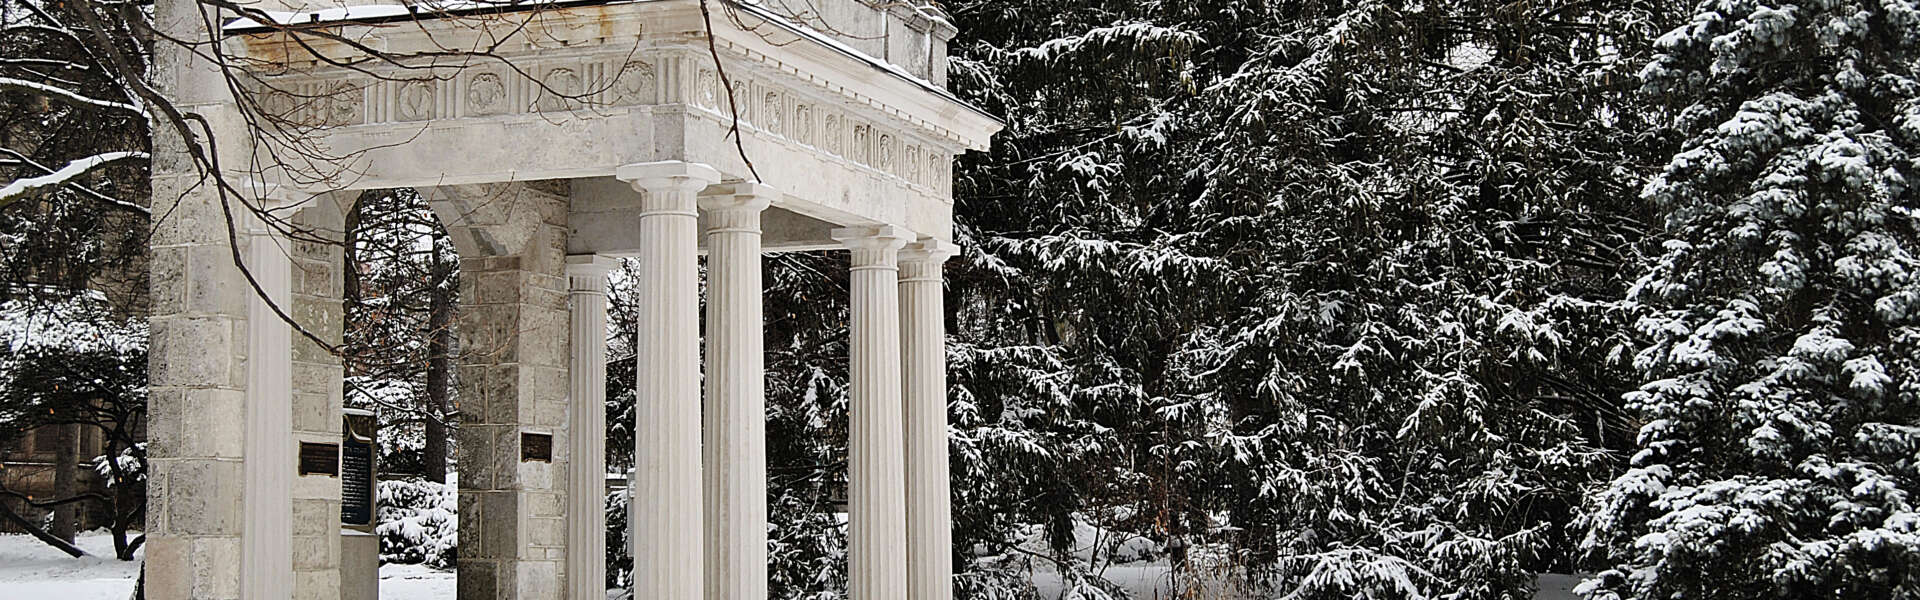 The portico on the U of G campus on a snowy day